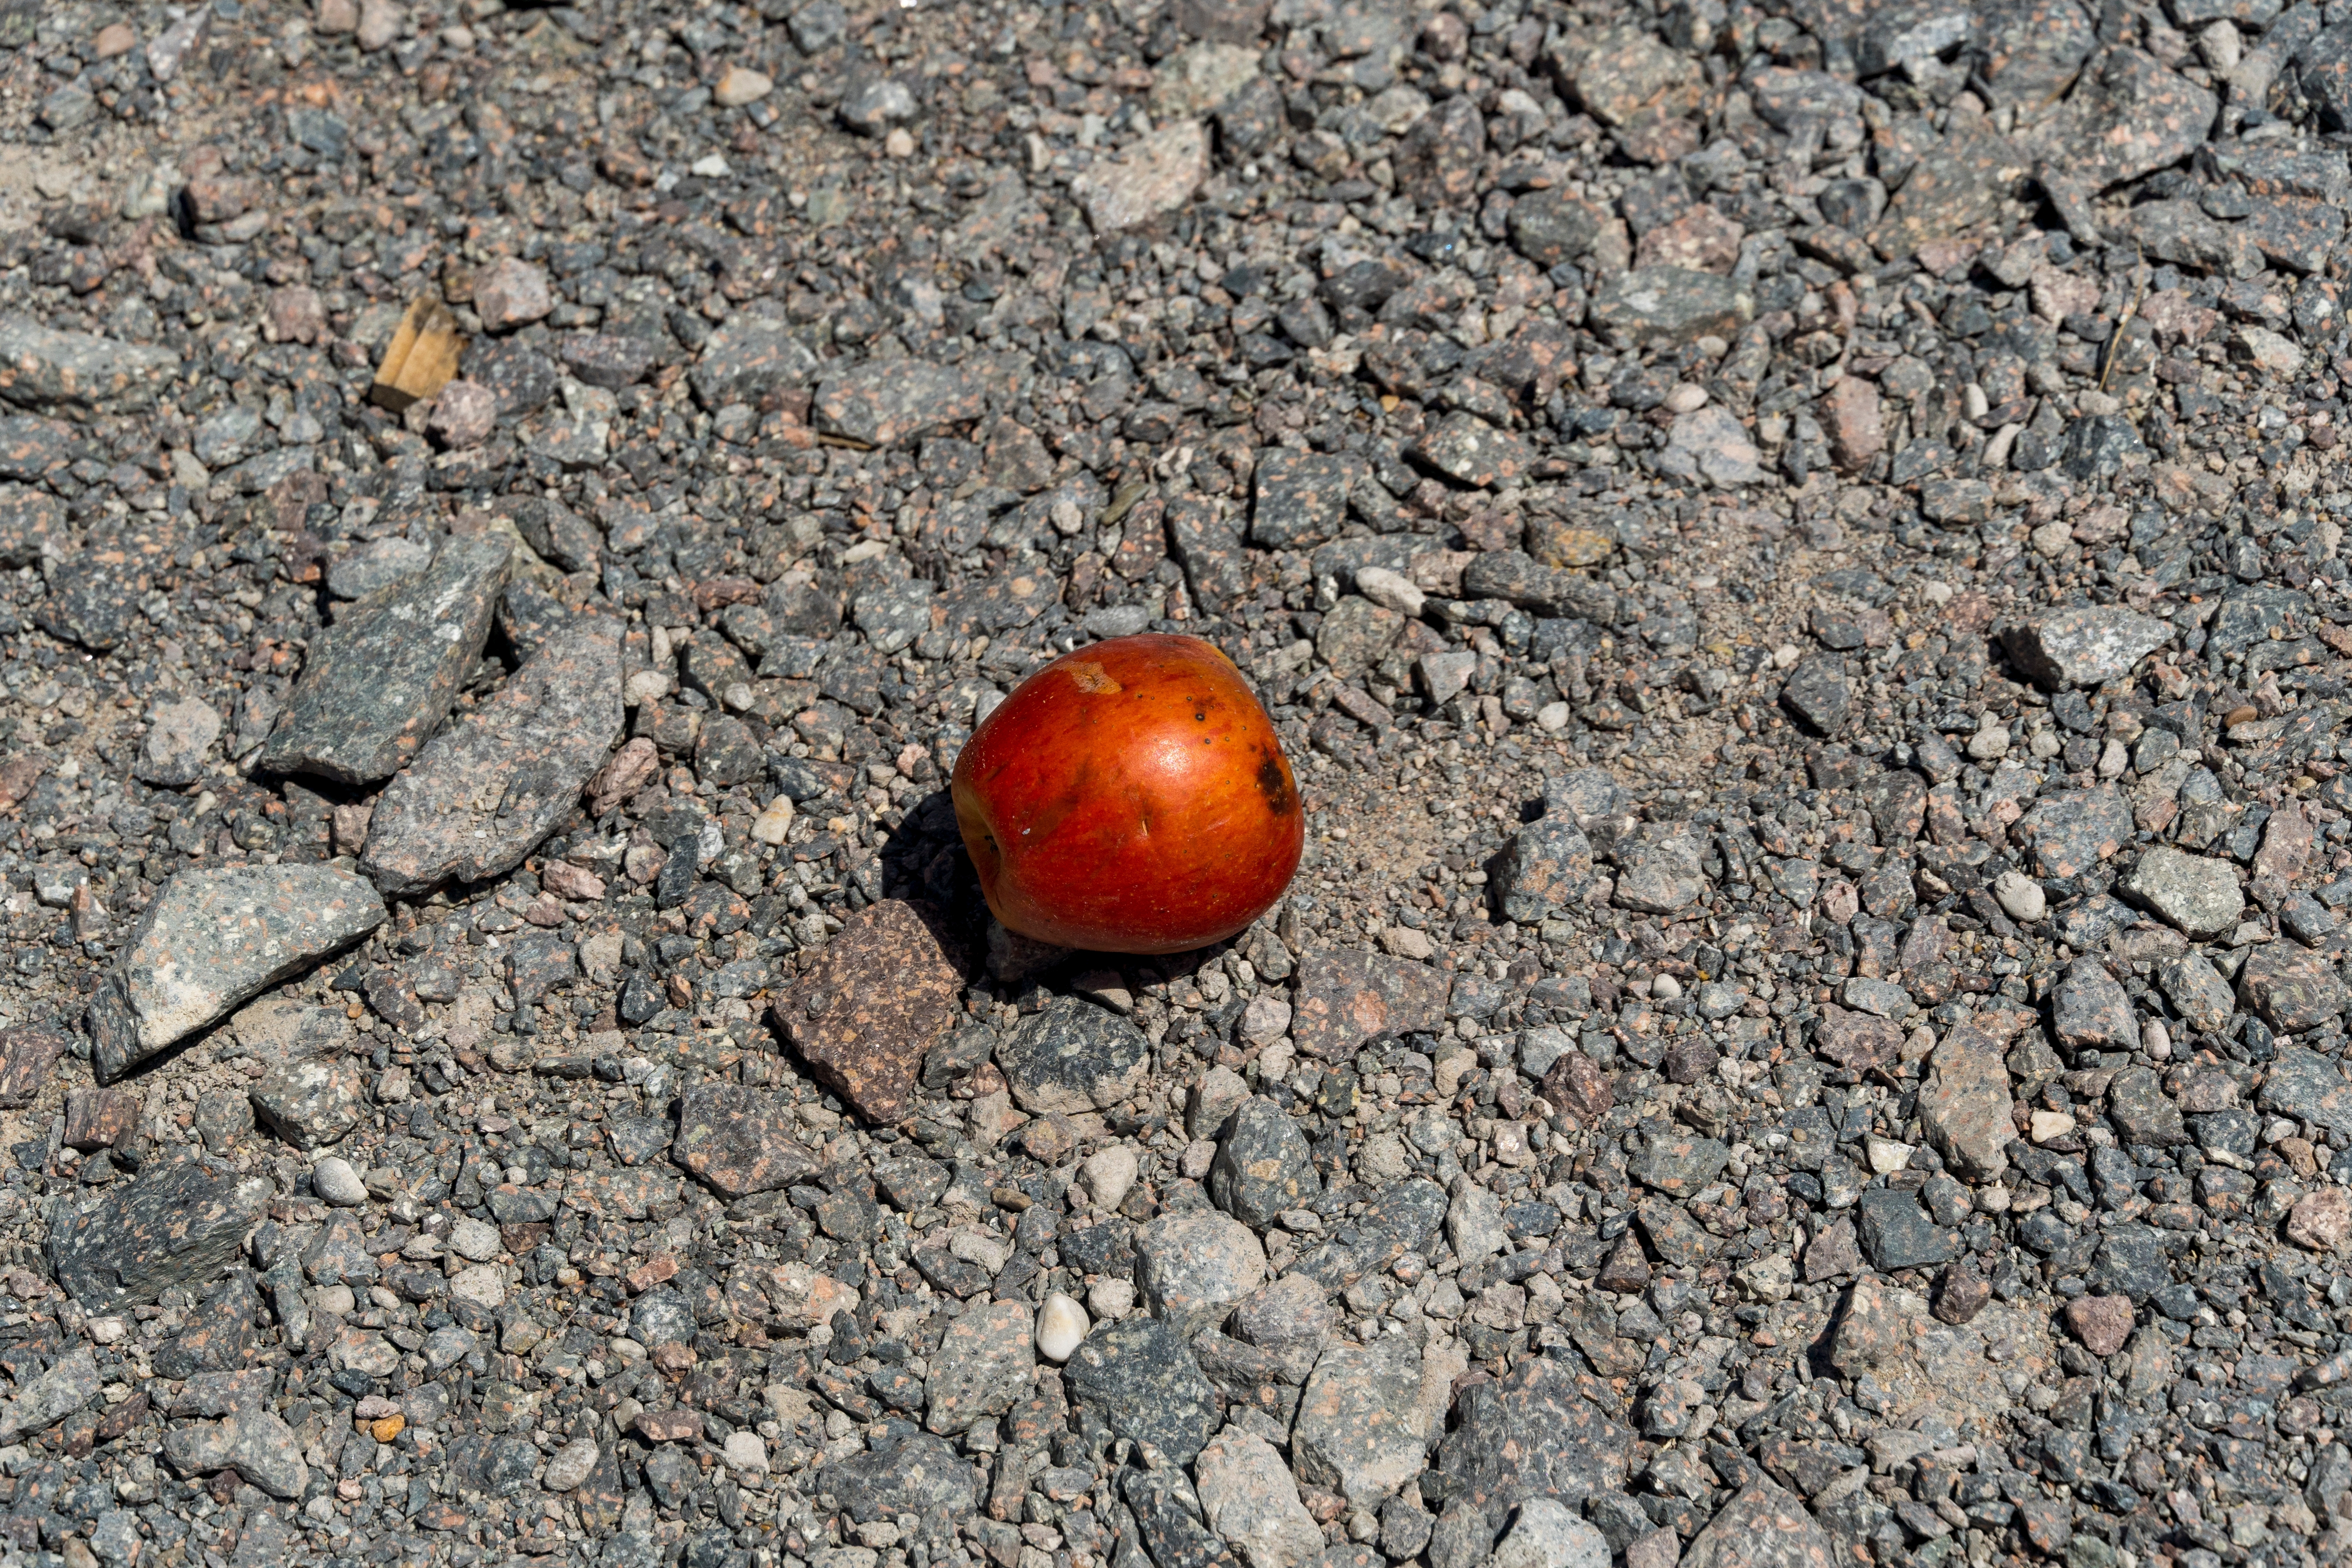 Red apple on a road | Source: Shutterstock